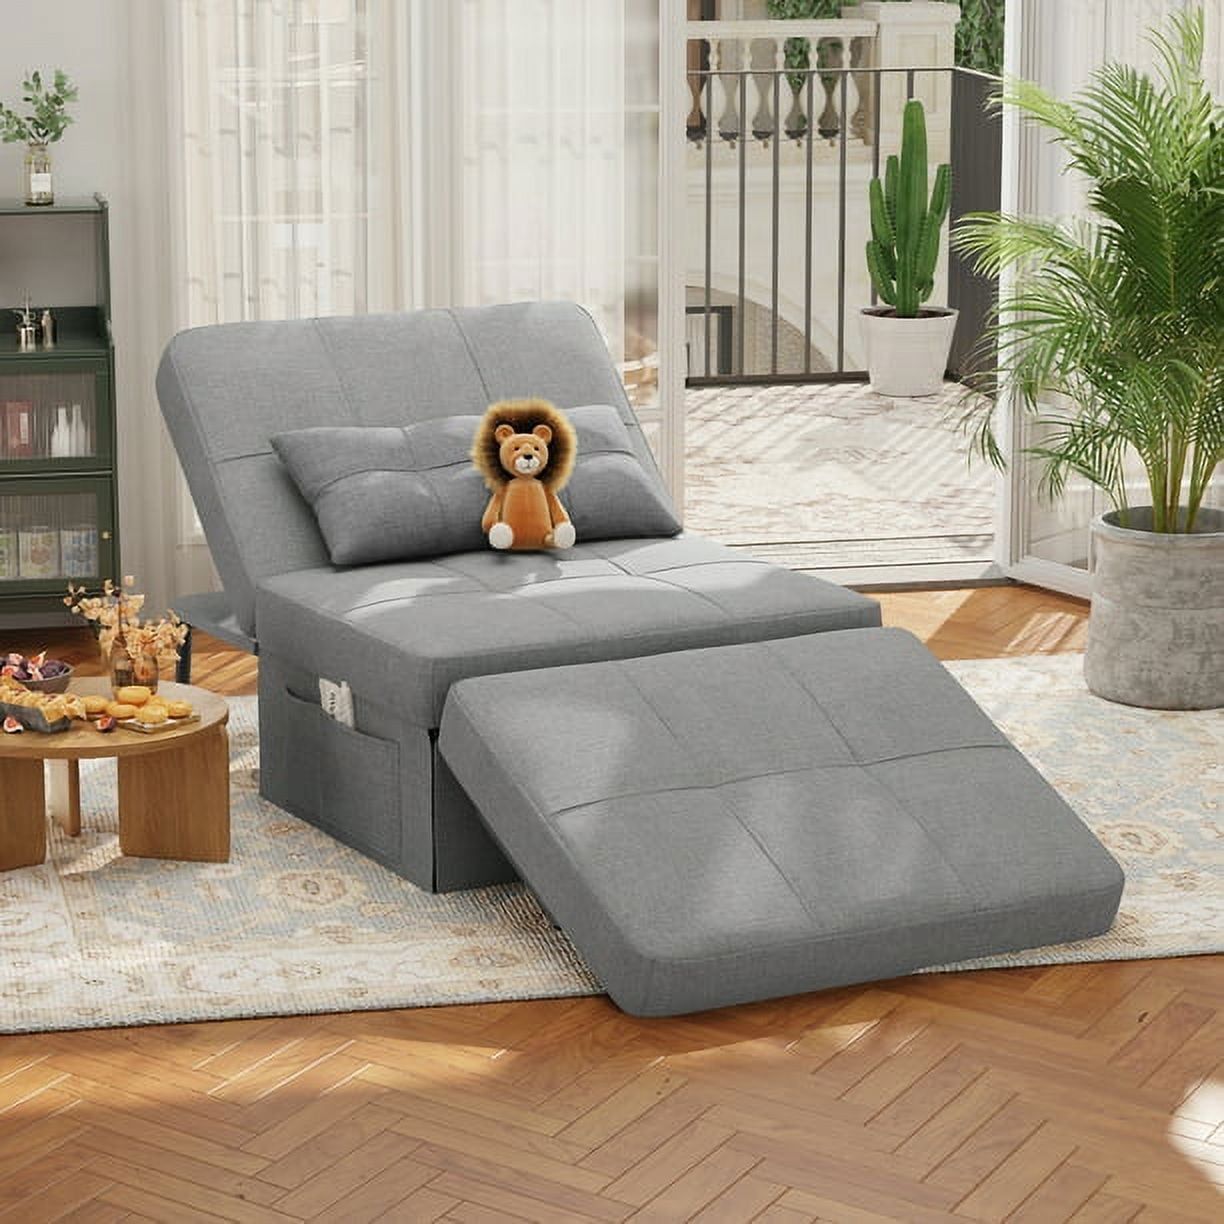 Chair Bed, Lofka Convertible Recliner Single Sofa Bed, Free Installation,  730 Lbs, Light Gray – Walmart Inside 8 Seat Convertible Sofas (View 12 of 15)